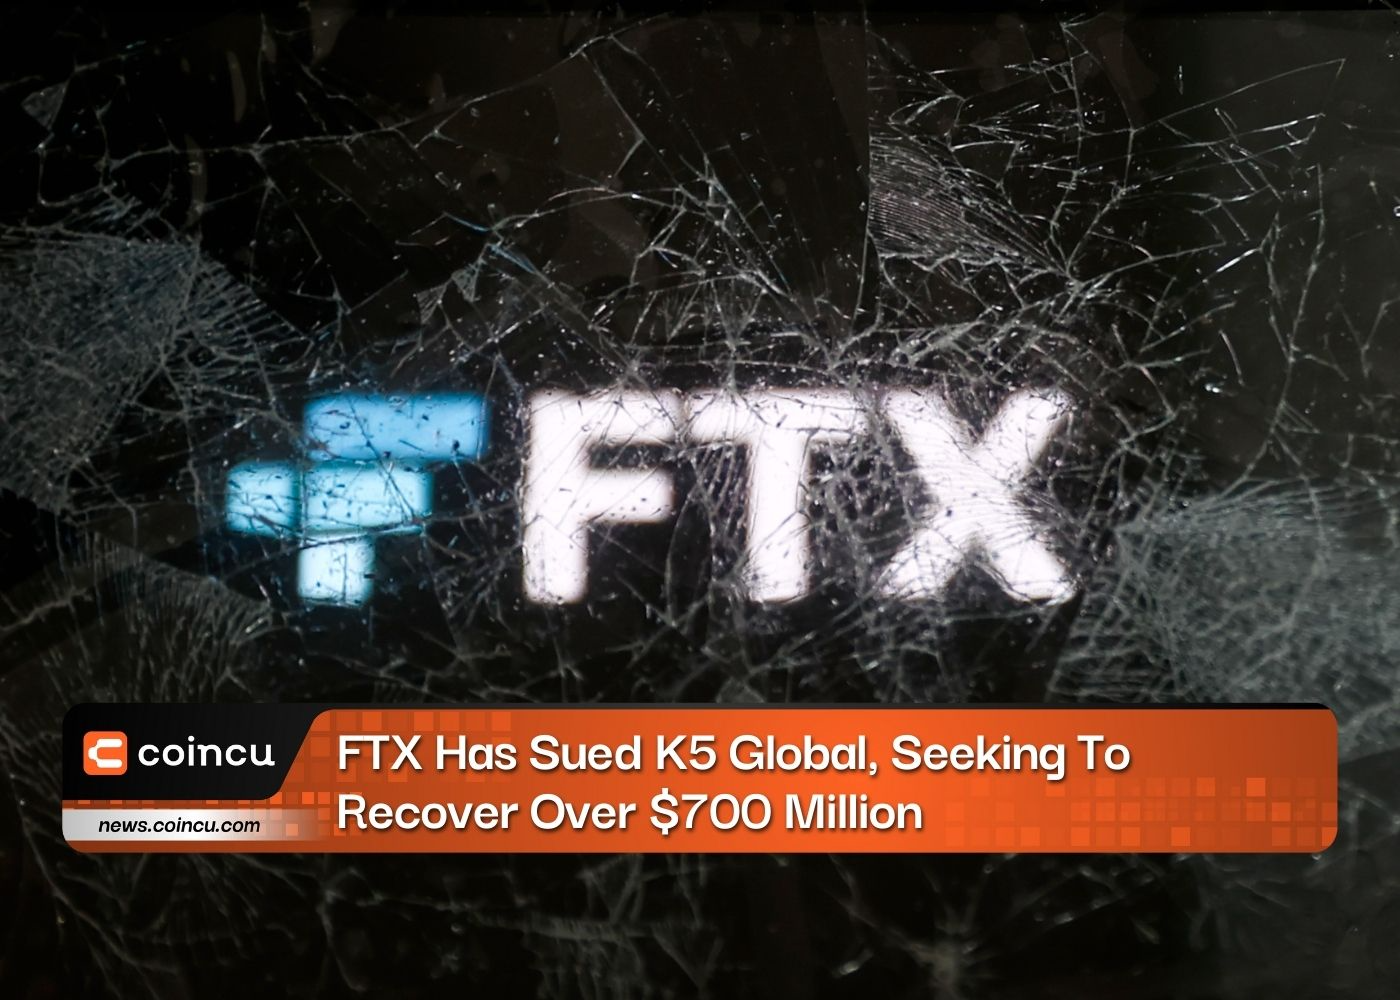 FTX Has Sued K5 Global, Seeking To Recover Over $700 Million